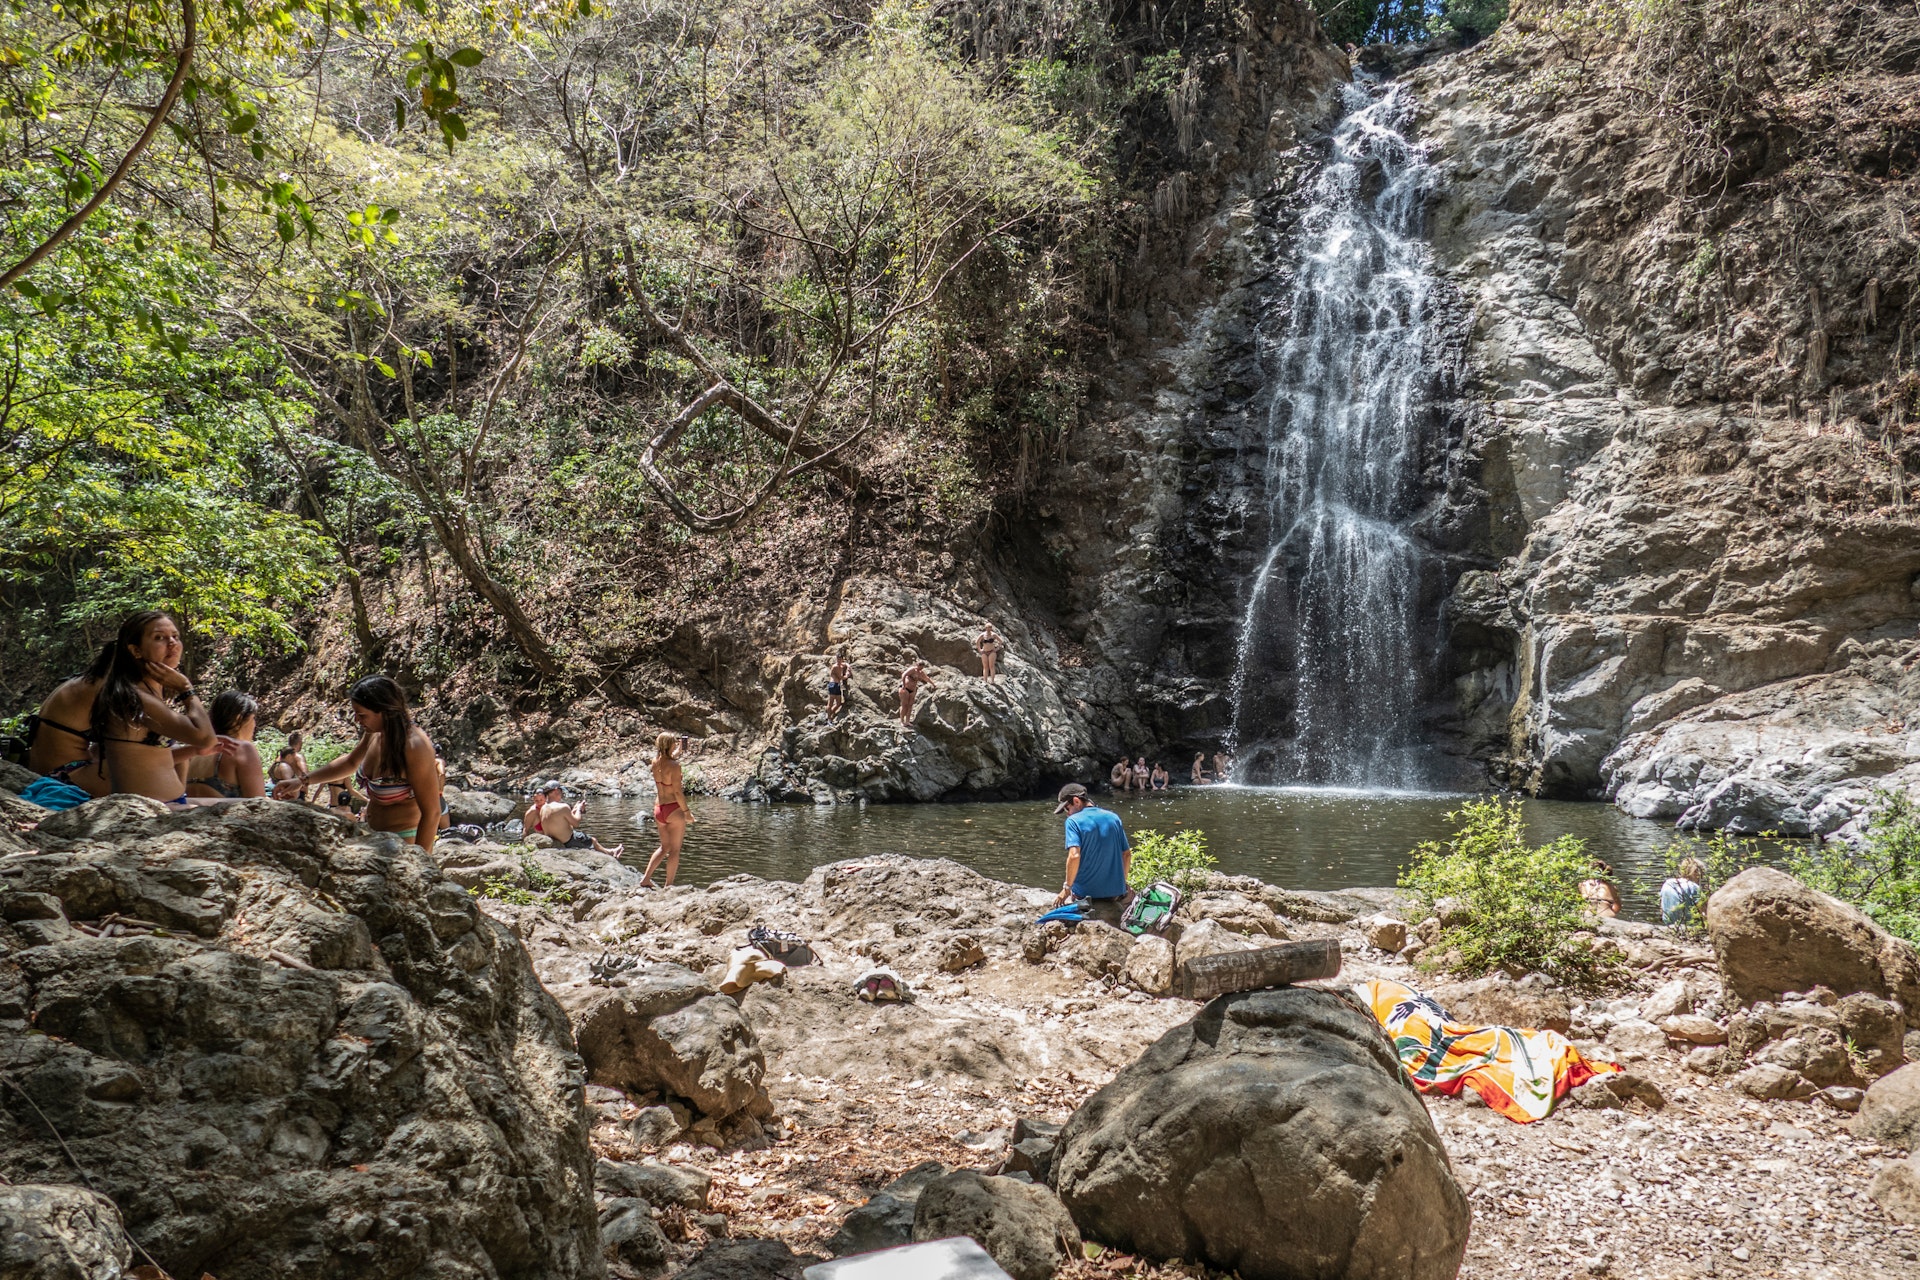 Small groups of people in bathing suits gathered on the rocky ground around Montezuma Falls in Costa Rica